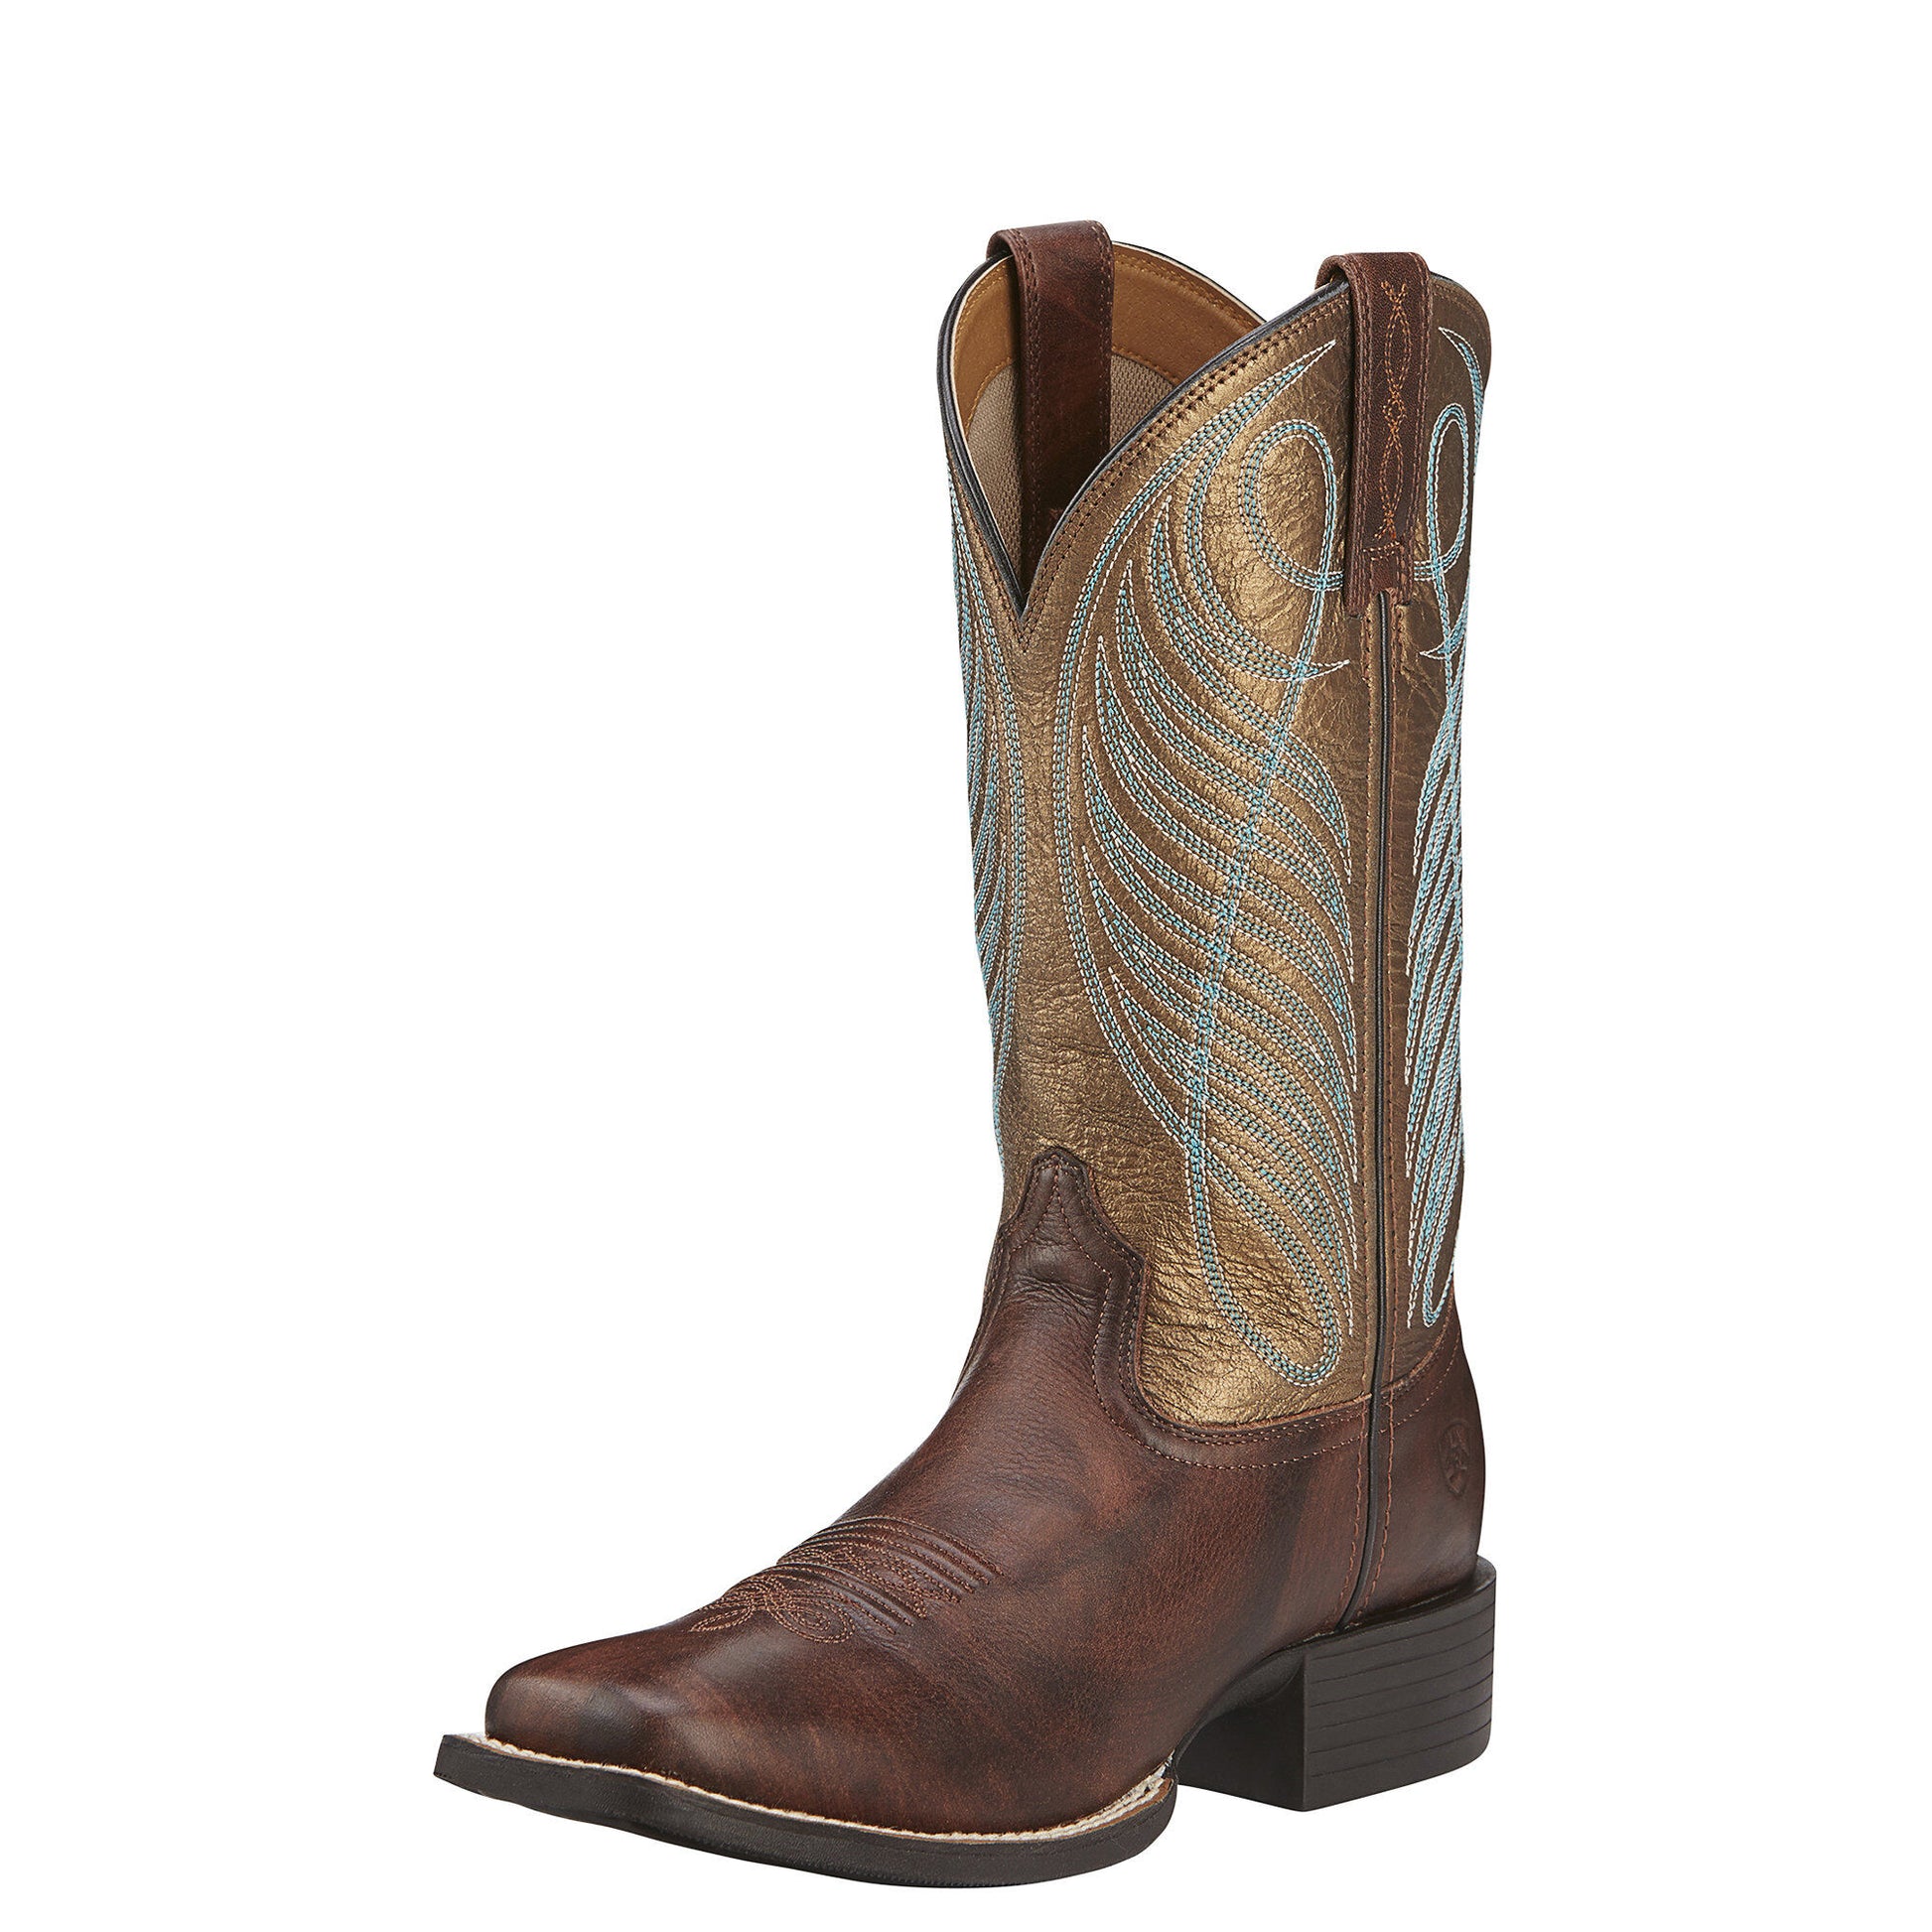 Ariat Women's Round Up Wide Square Toe Boot - Yukon Brown/Bronze - French's Boots